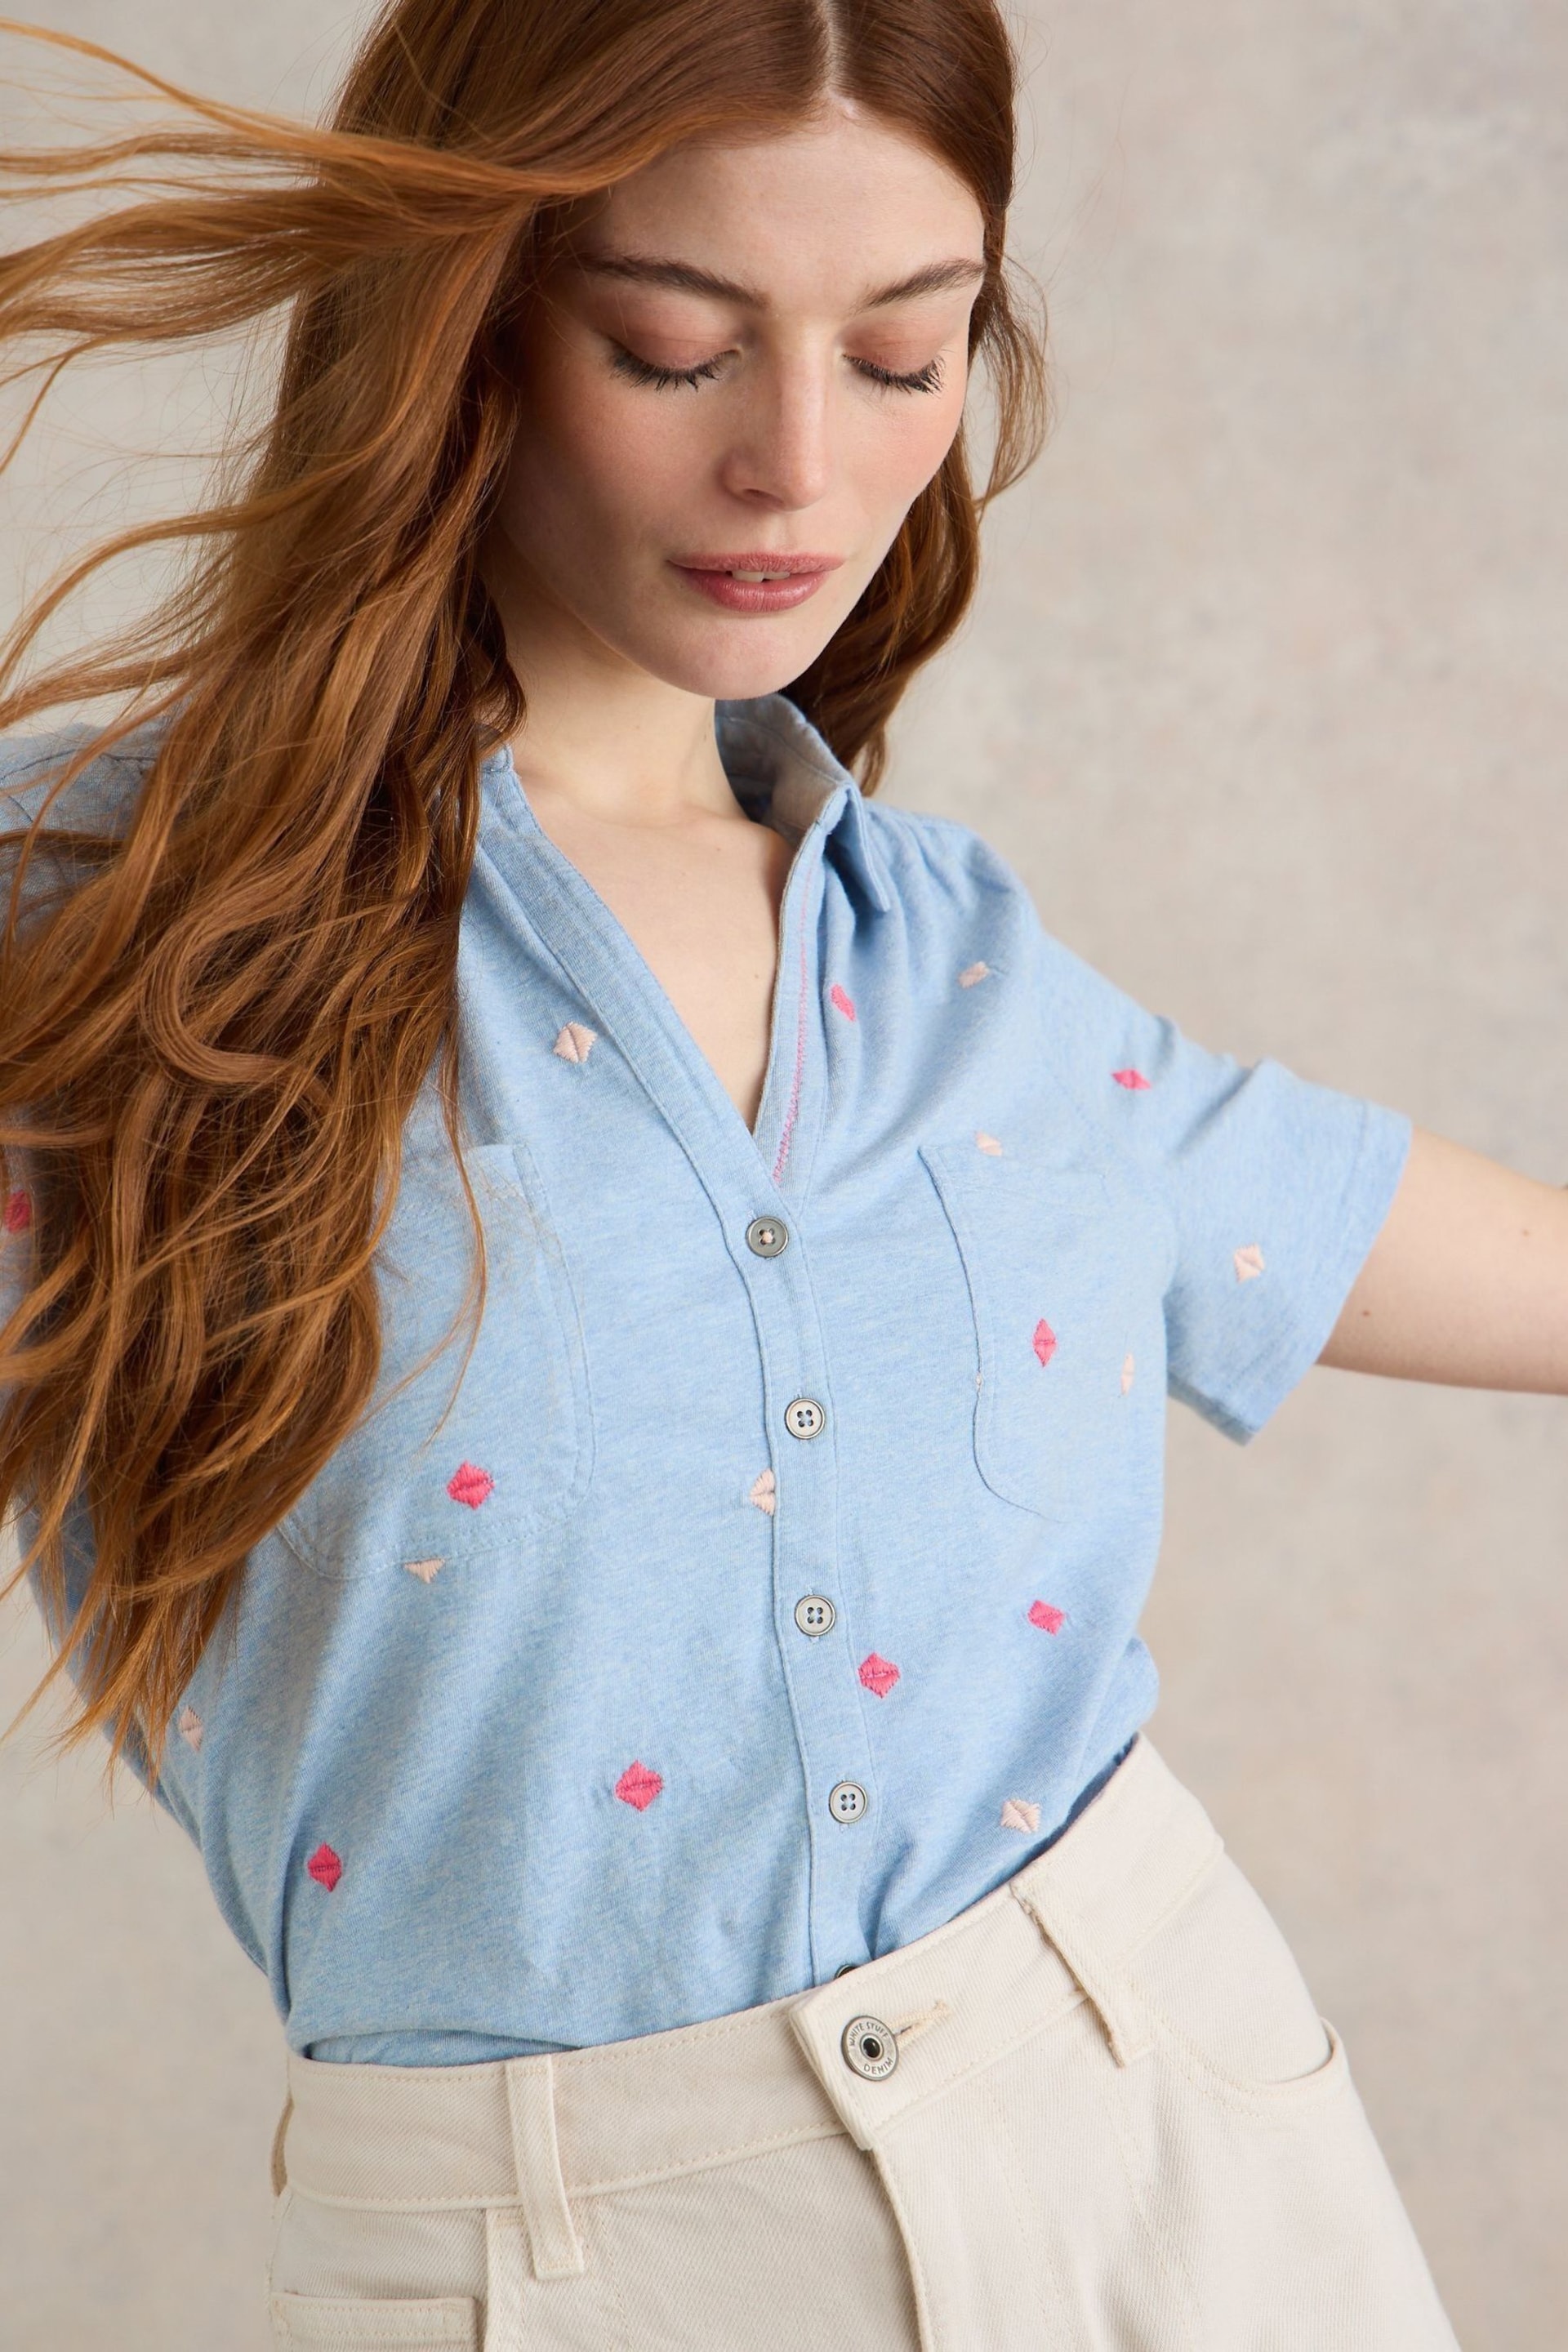 White Stuff Blue Penny Pocket Embroidered Shirt - Image 1 of 7